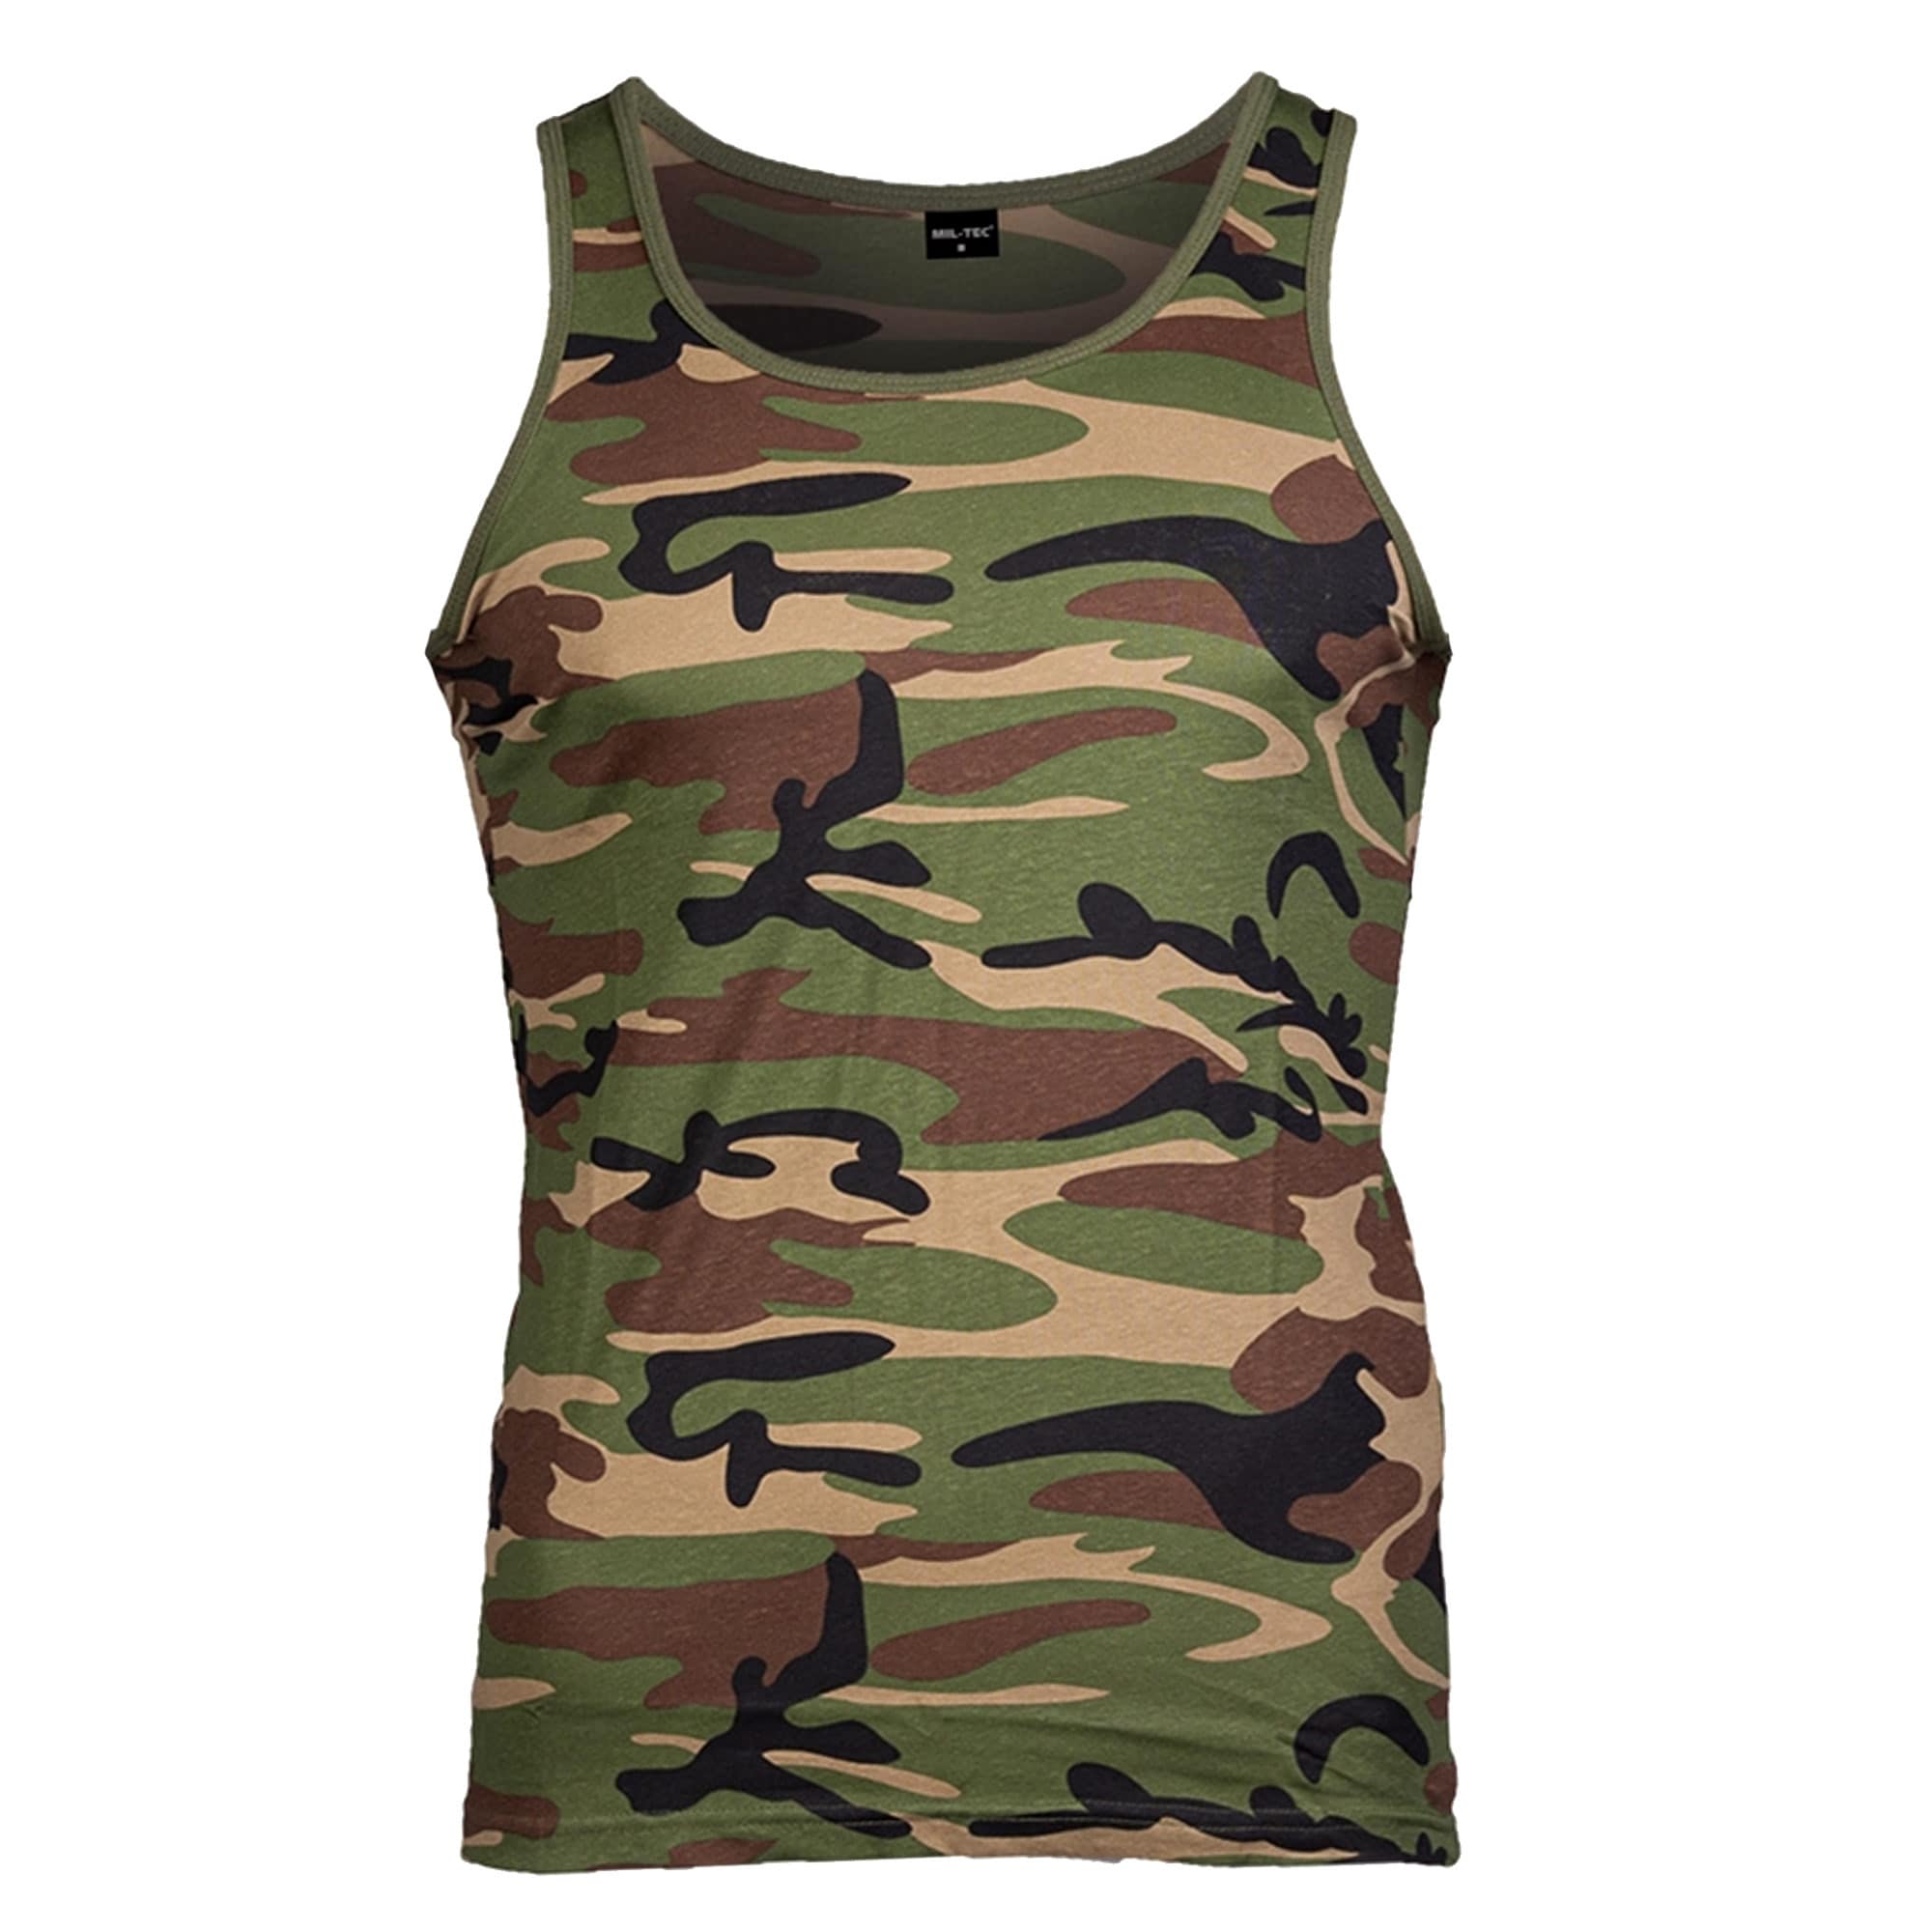 Military Army Combat Cotton Mens Vest Sleeveless All Sizes COYOTE TANK TOP 